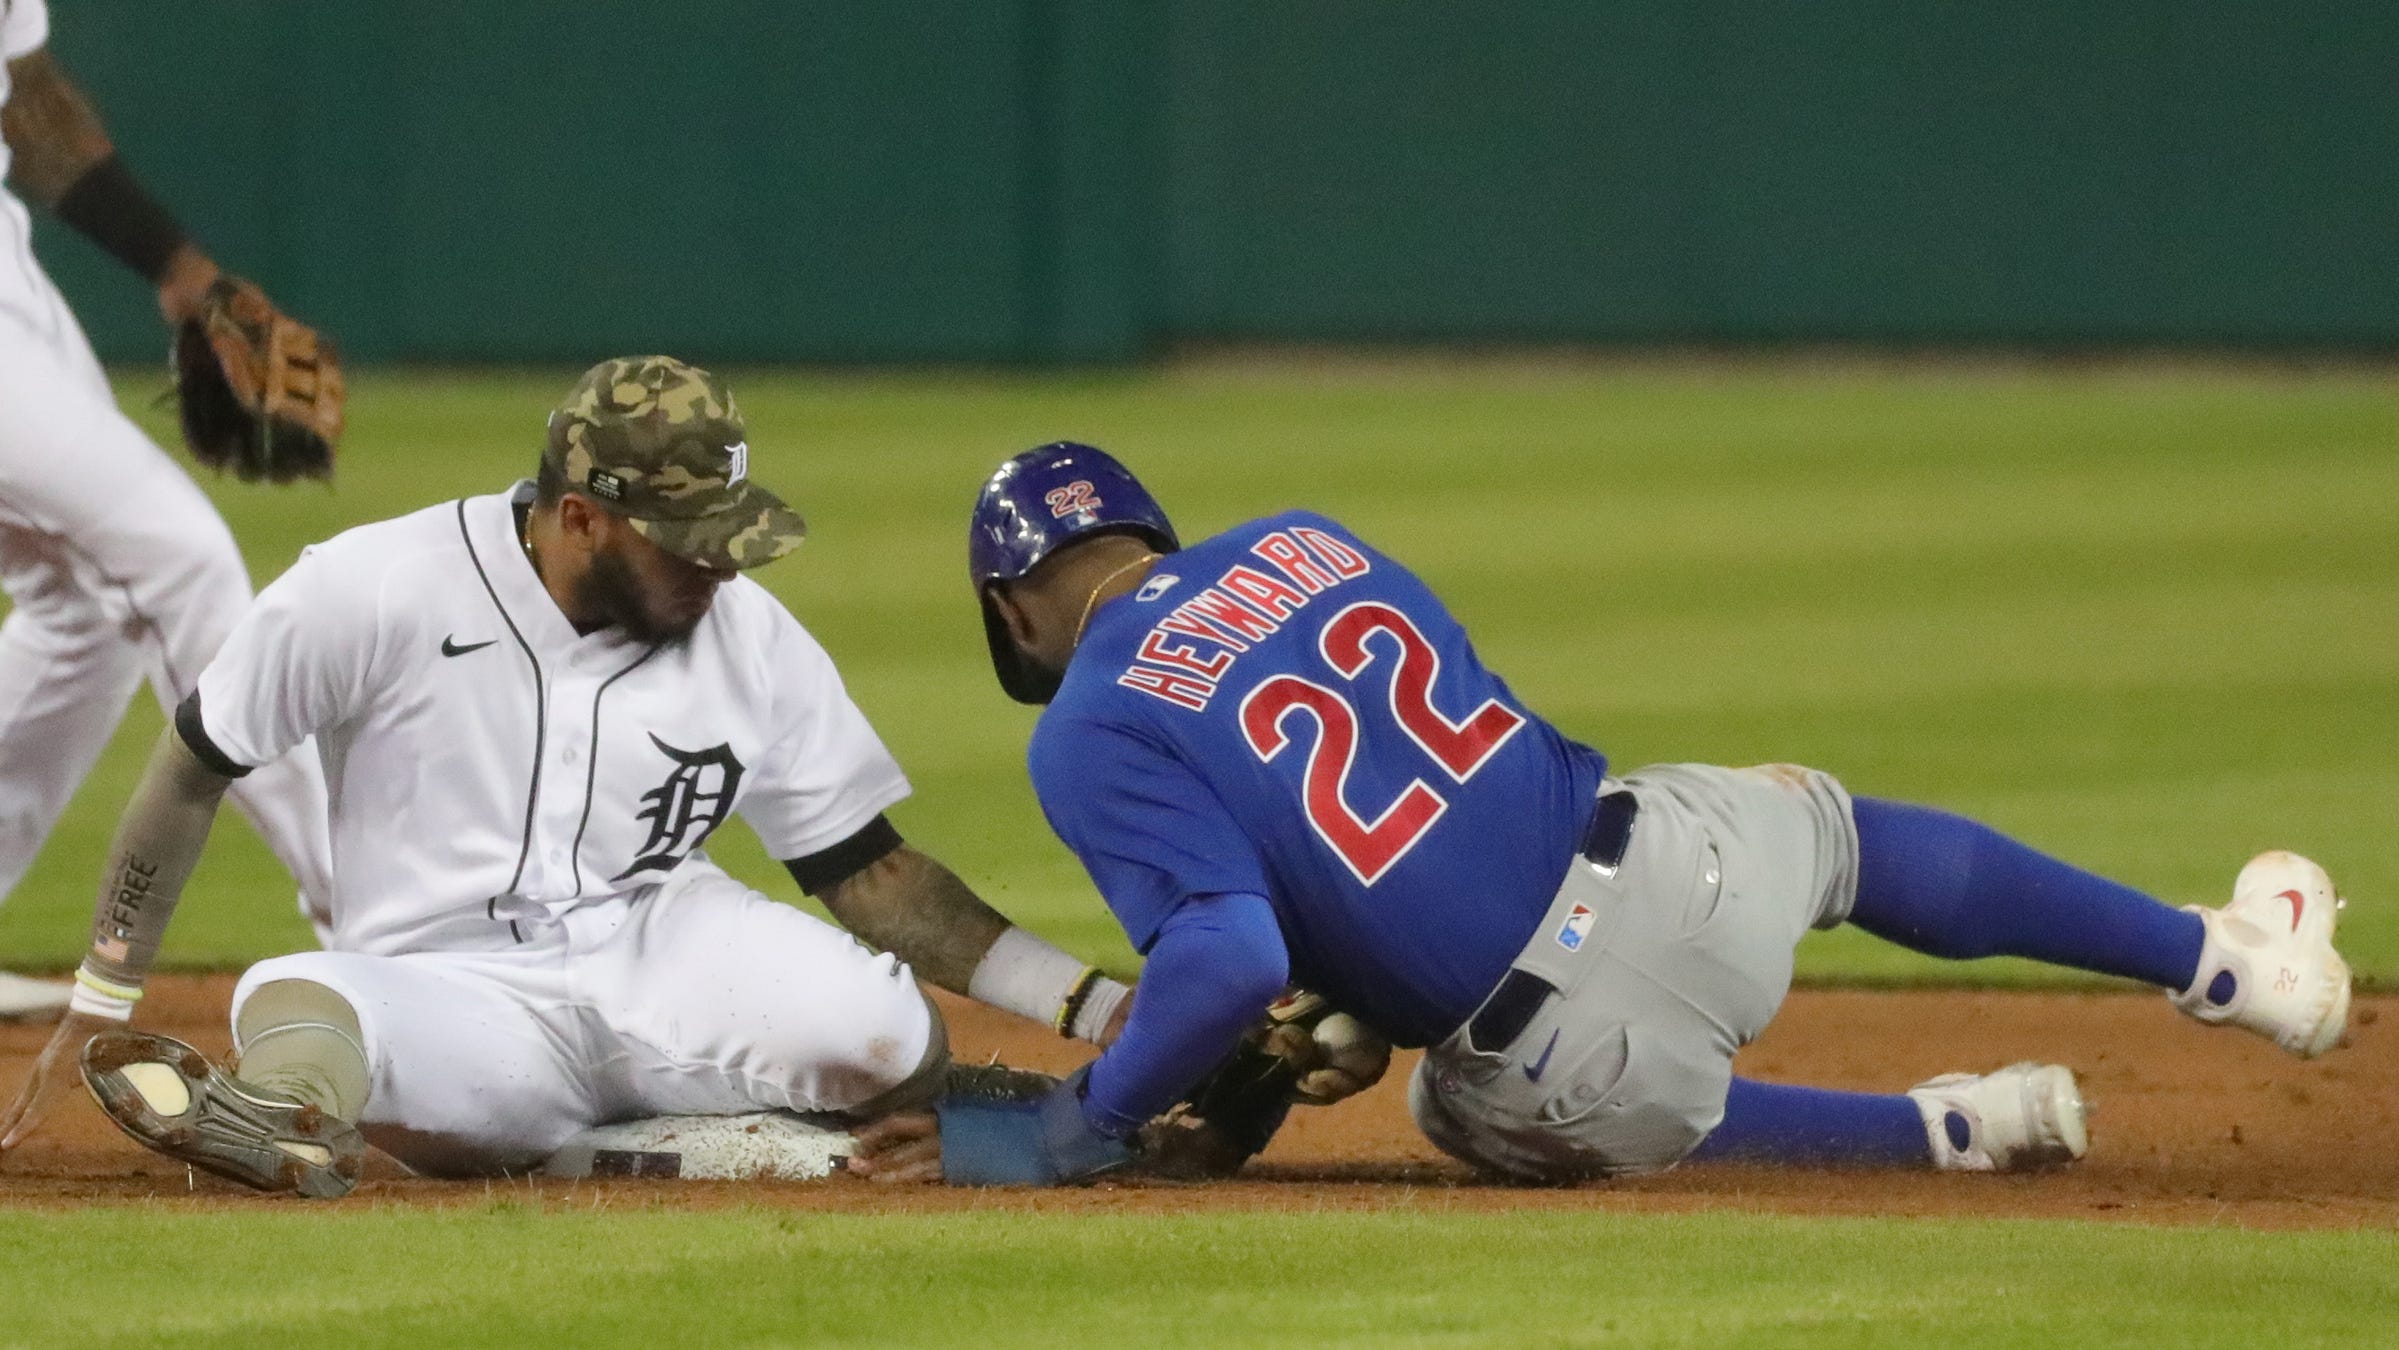 Tigers second baseman Harold Castro tags out Cubs right fielder Jason Heyward during the ninth inning of the Tigers' 4-2 loss on Friday, May 14, 2021, at Comerica Park.